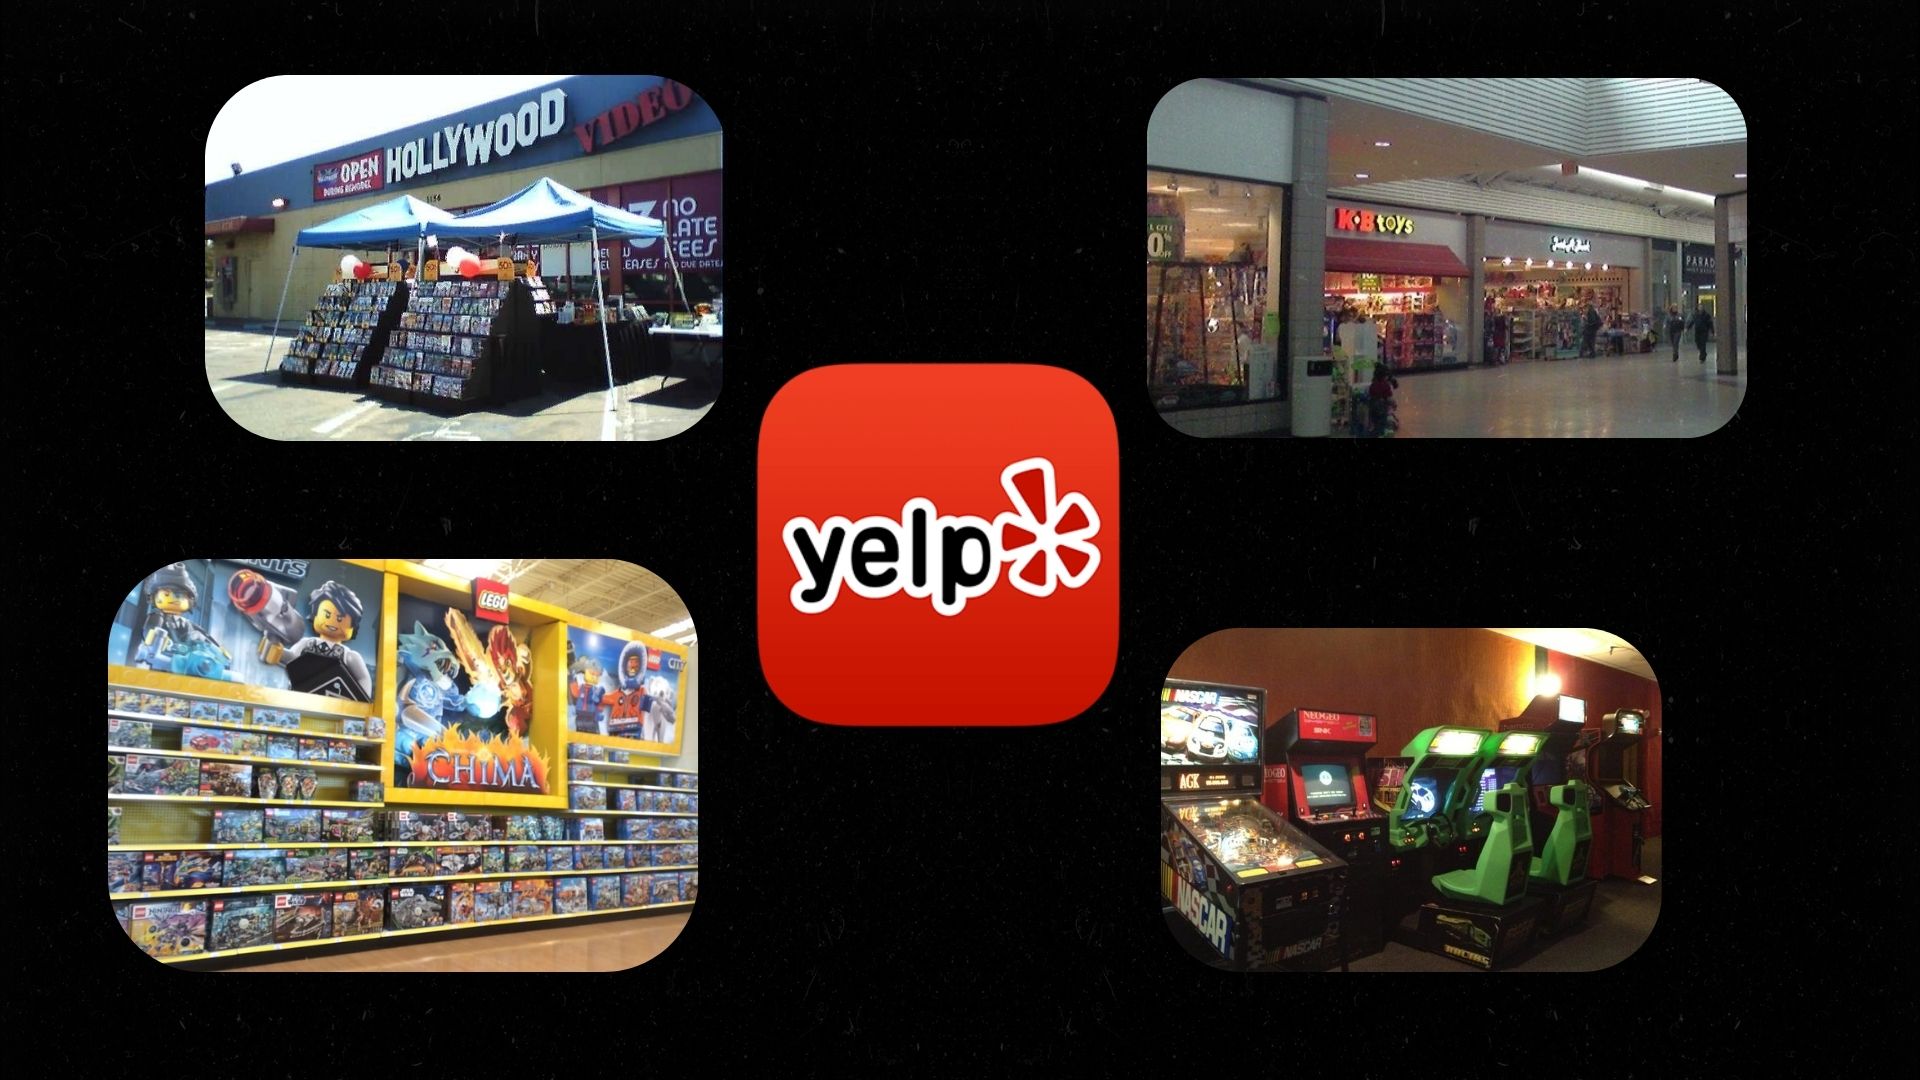 Using Yelp to find old photos of closed locations